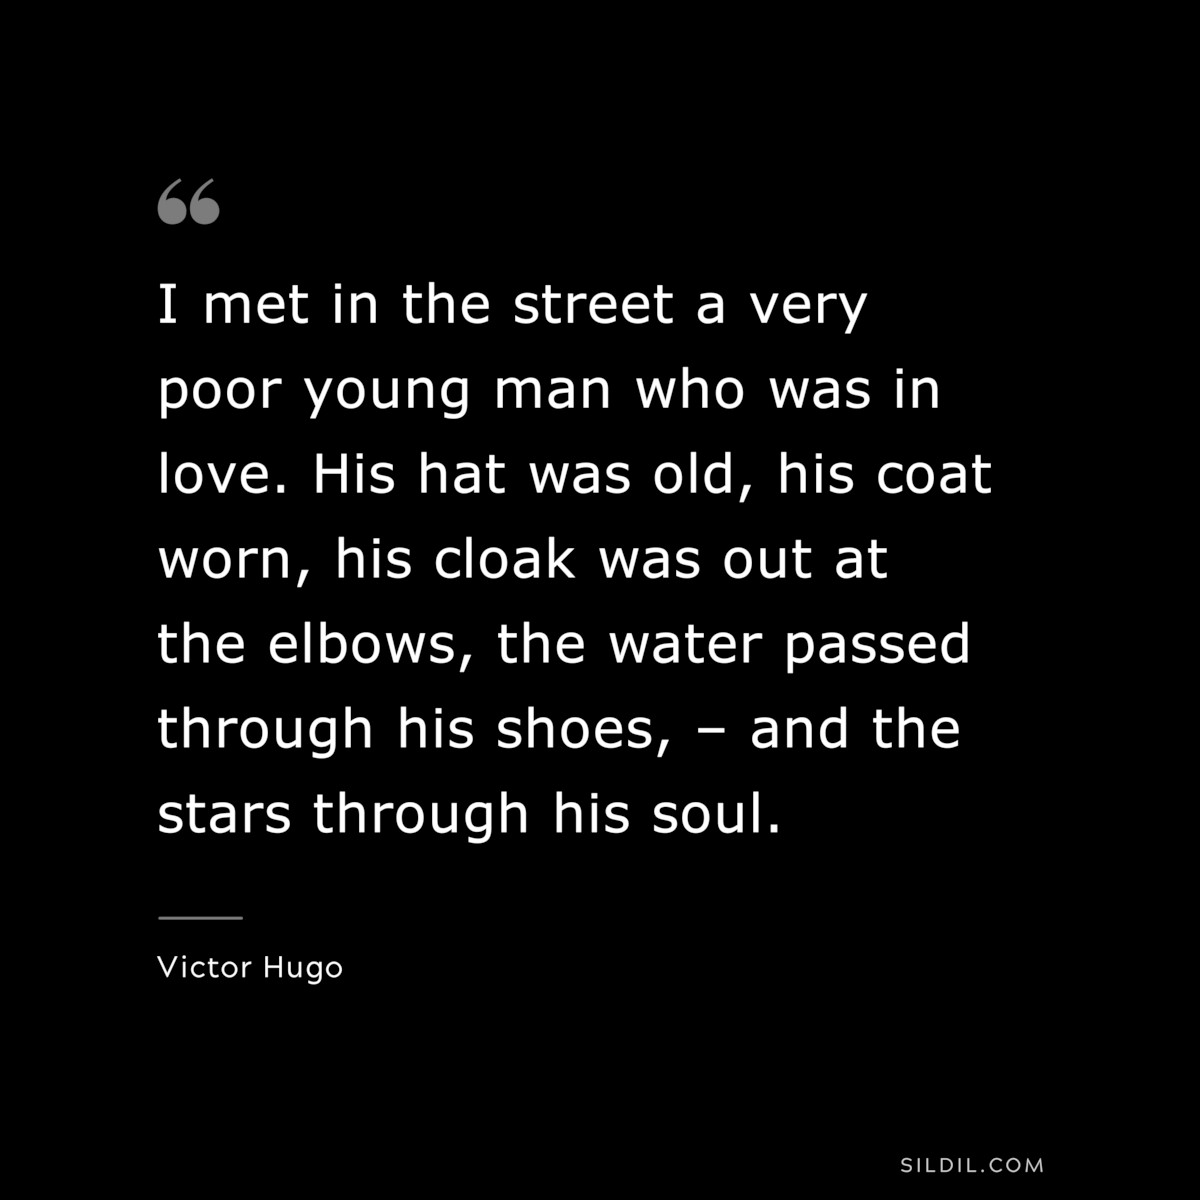 I met in the street a very poor young man who was in love. His hat was old, his coat worn, his cloak was out at the elbows, the water passed through his shoes, – and the stars through his soul.― Victor Hugo